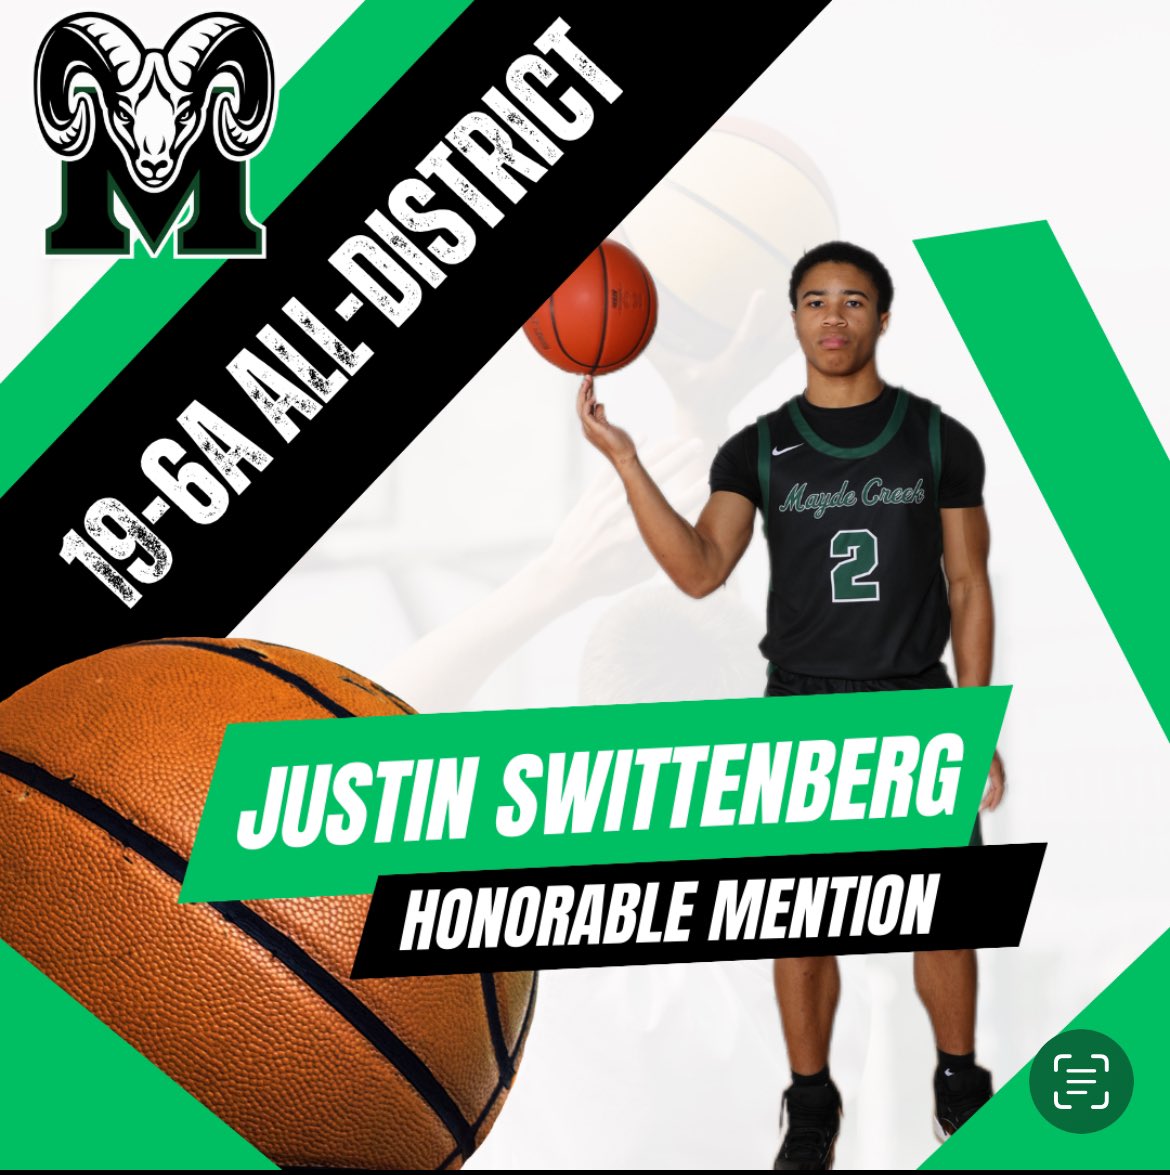 Congratulations to our Senior Guard Justin Swittenberg on being selected to the All-District honorable mention Team in District 19-6A!